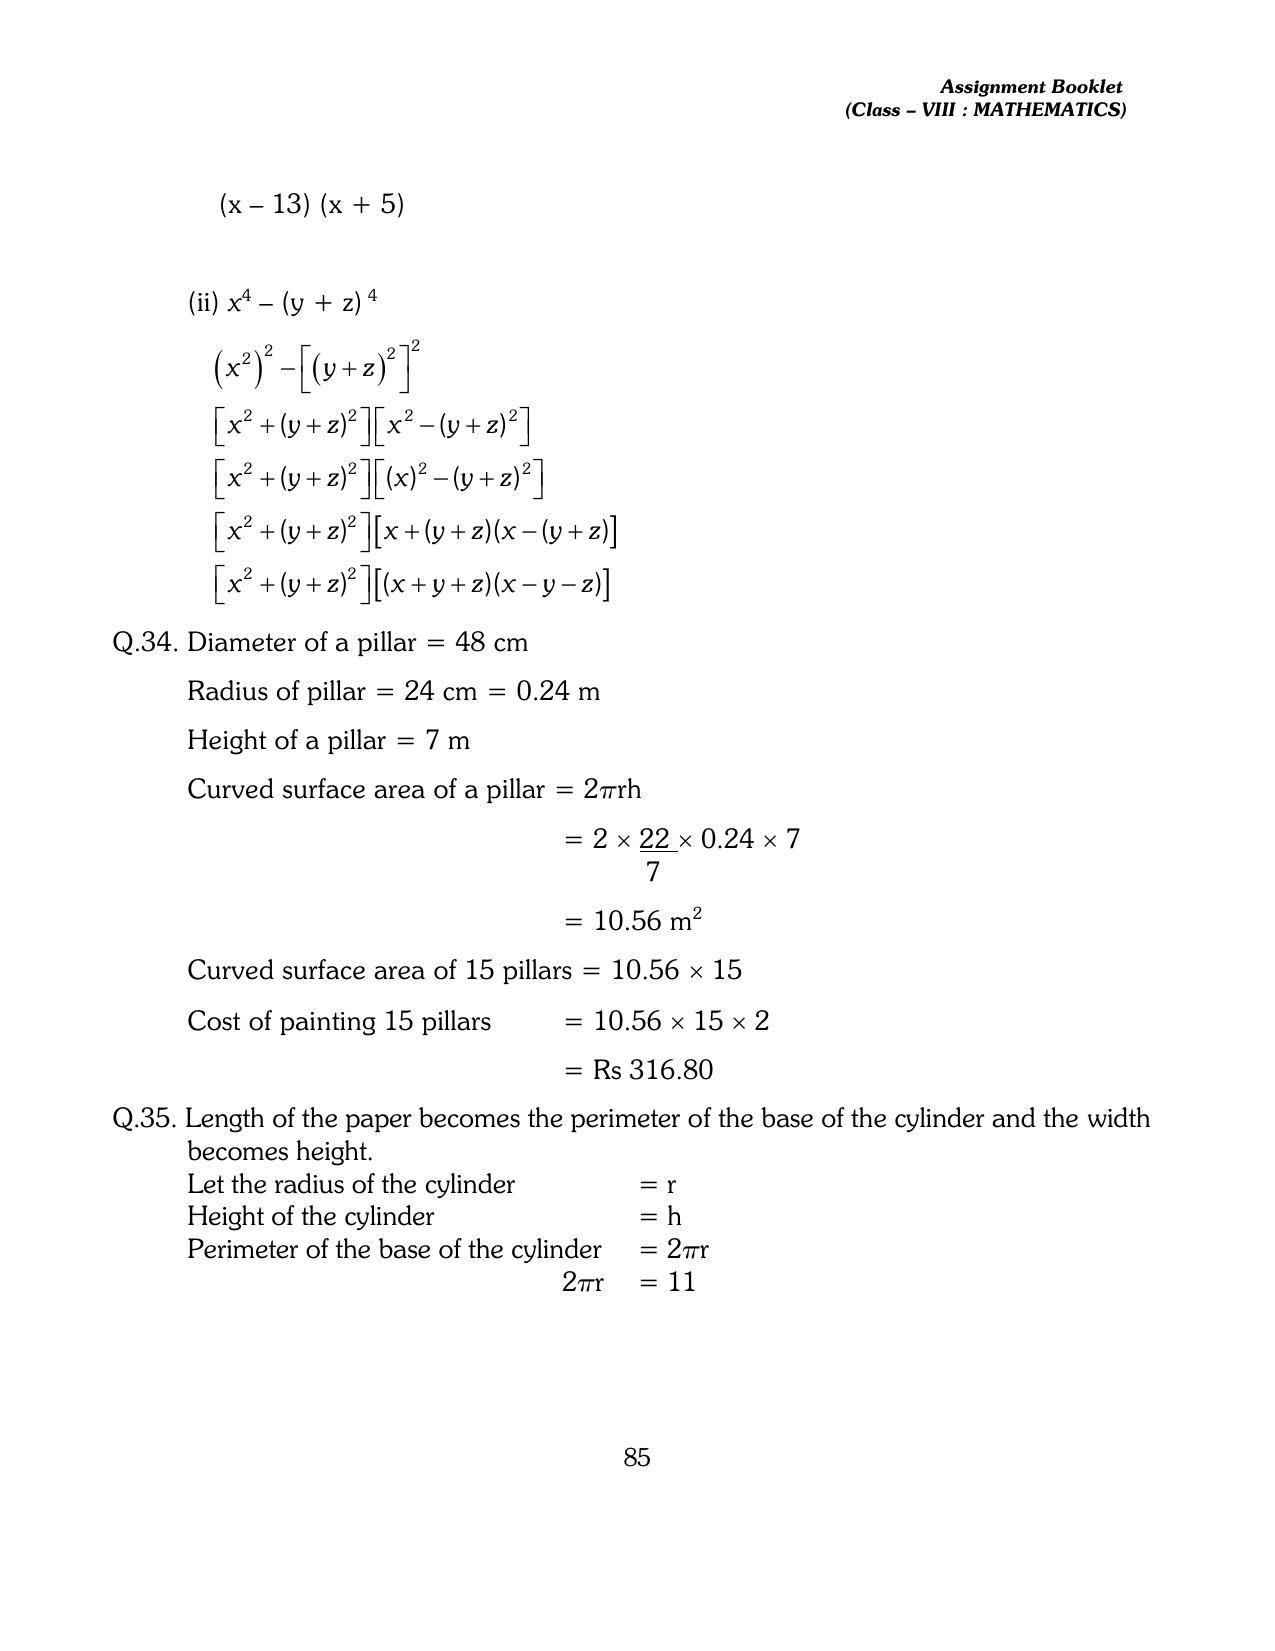 CBSE Worksheets for Class 8 Mathematics Assignment 13 - Page 75